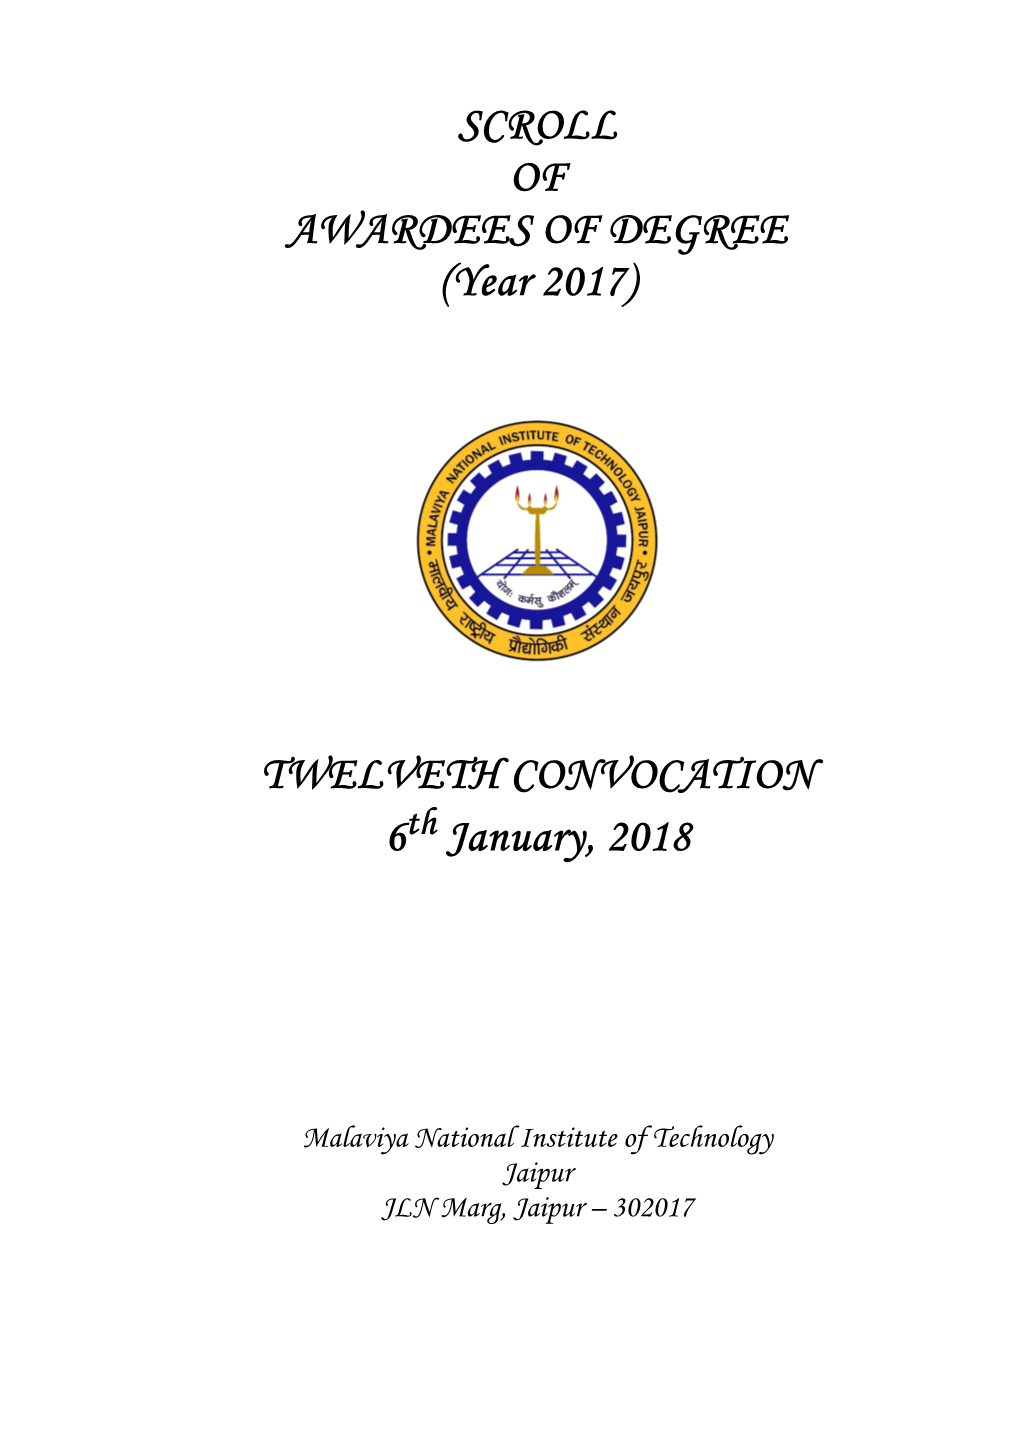 SCROLL of AWARDEES of DEGREE (Year 2017)